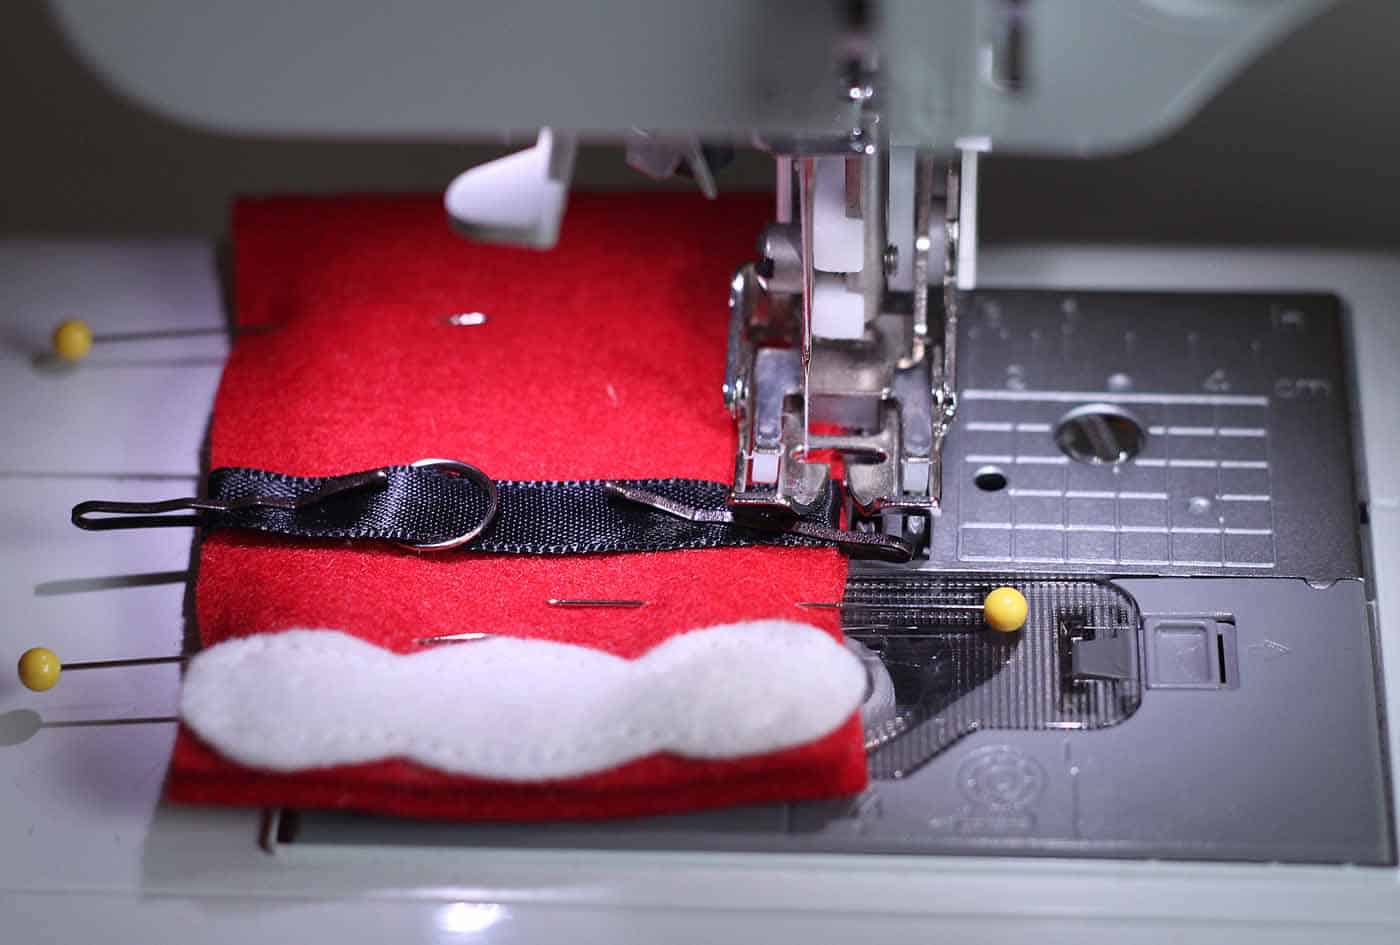 Sewing around the edges of the Santa gift card holder